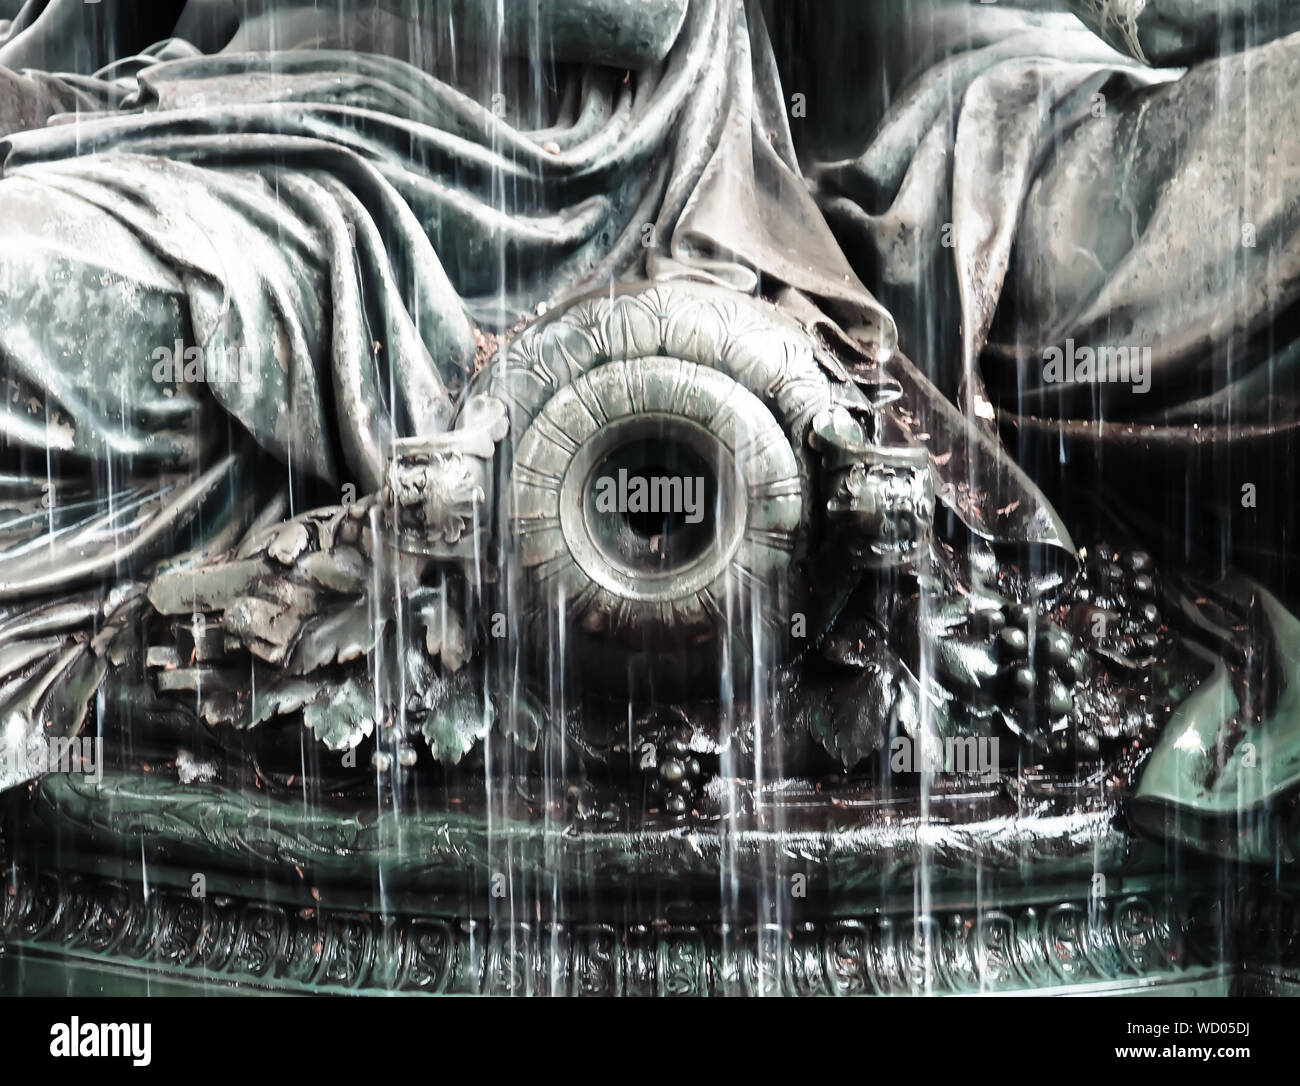 Grunge Effect Of Old Sculpture Water Fountain Stock Photo